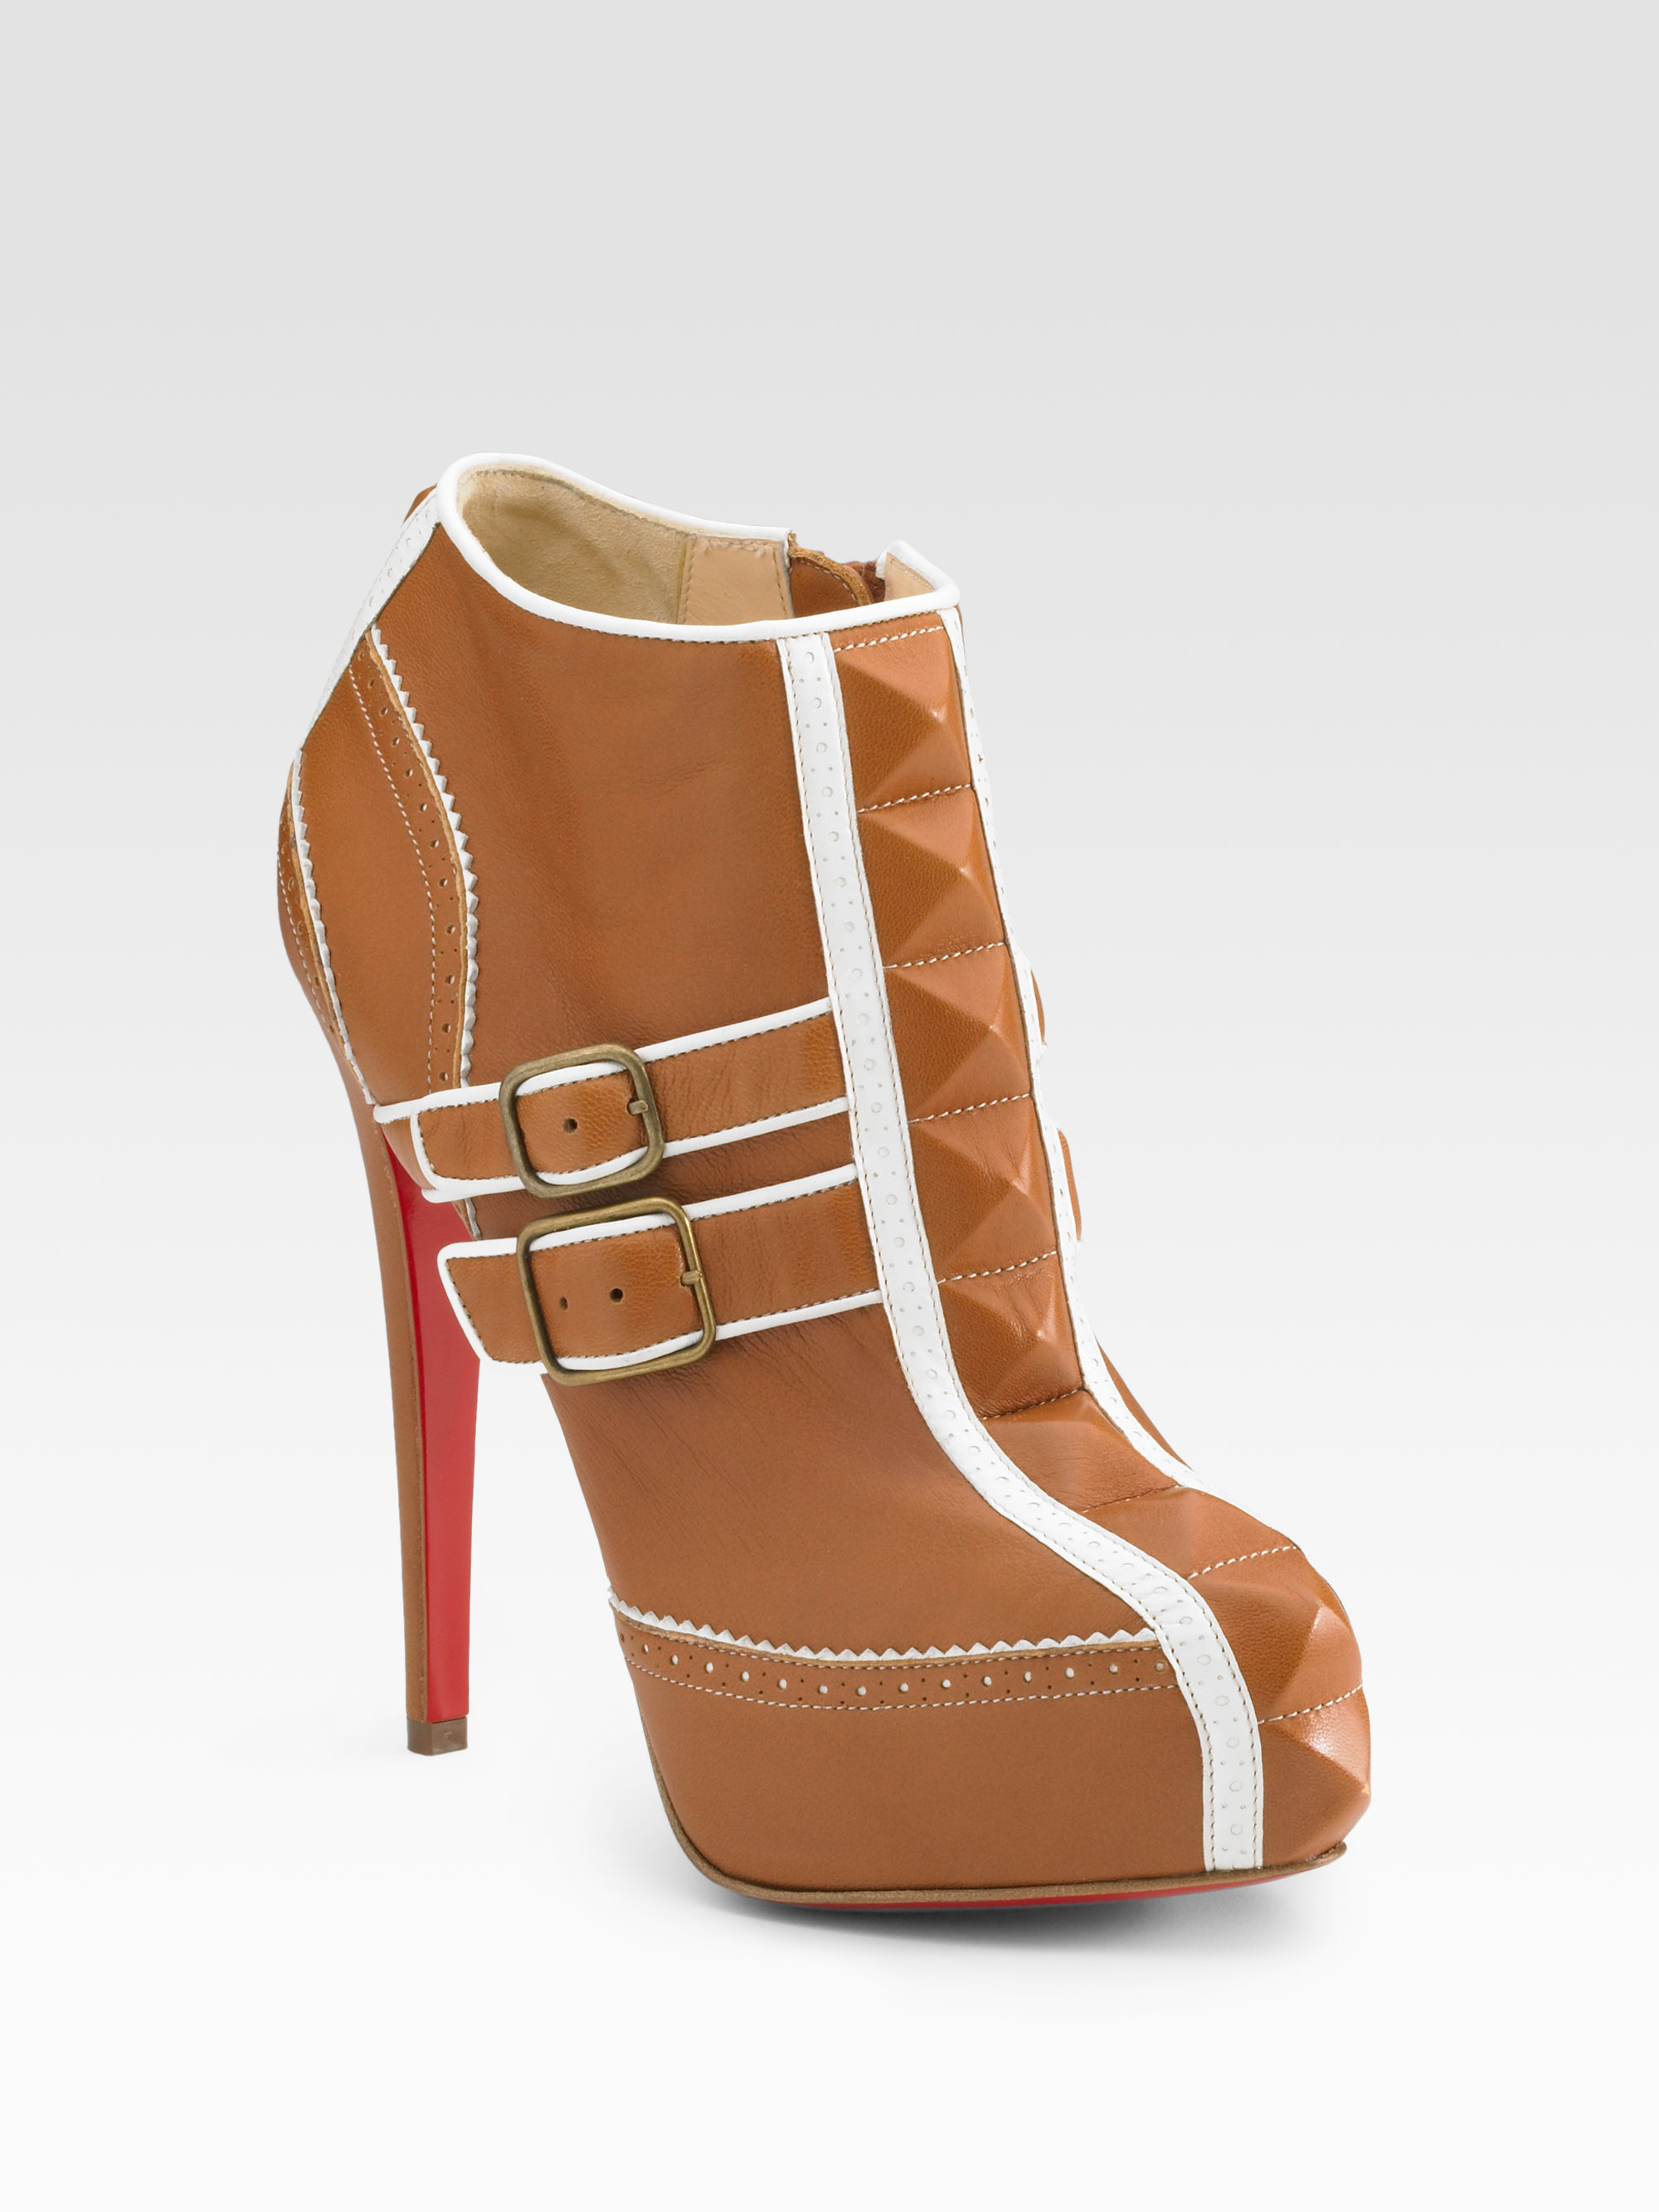 Christian Louboutin Bobo Leather Ankle Boots in White (tan-white) | Lyst